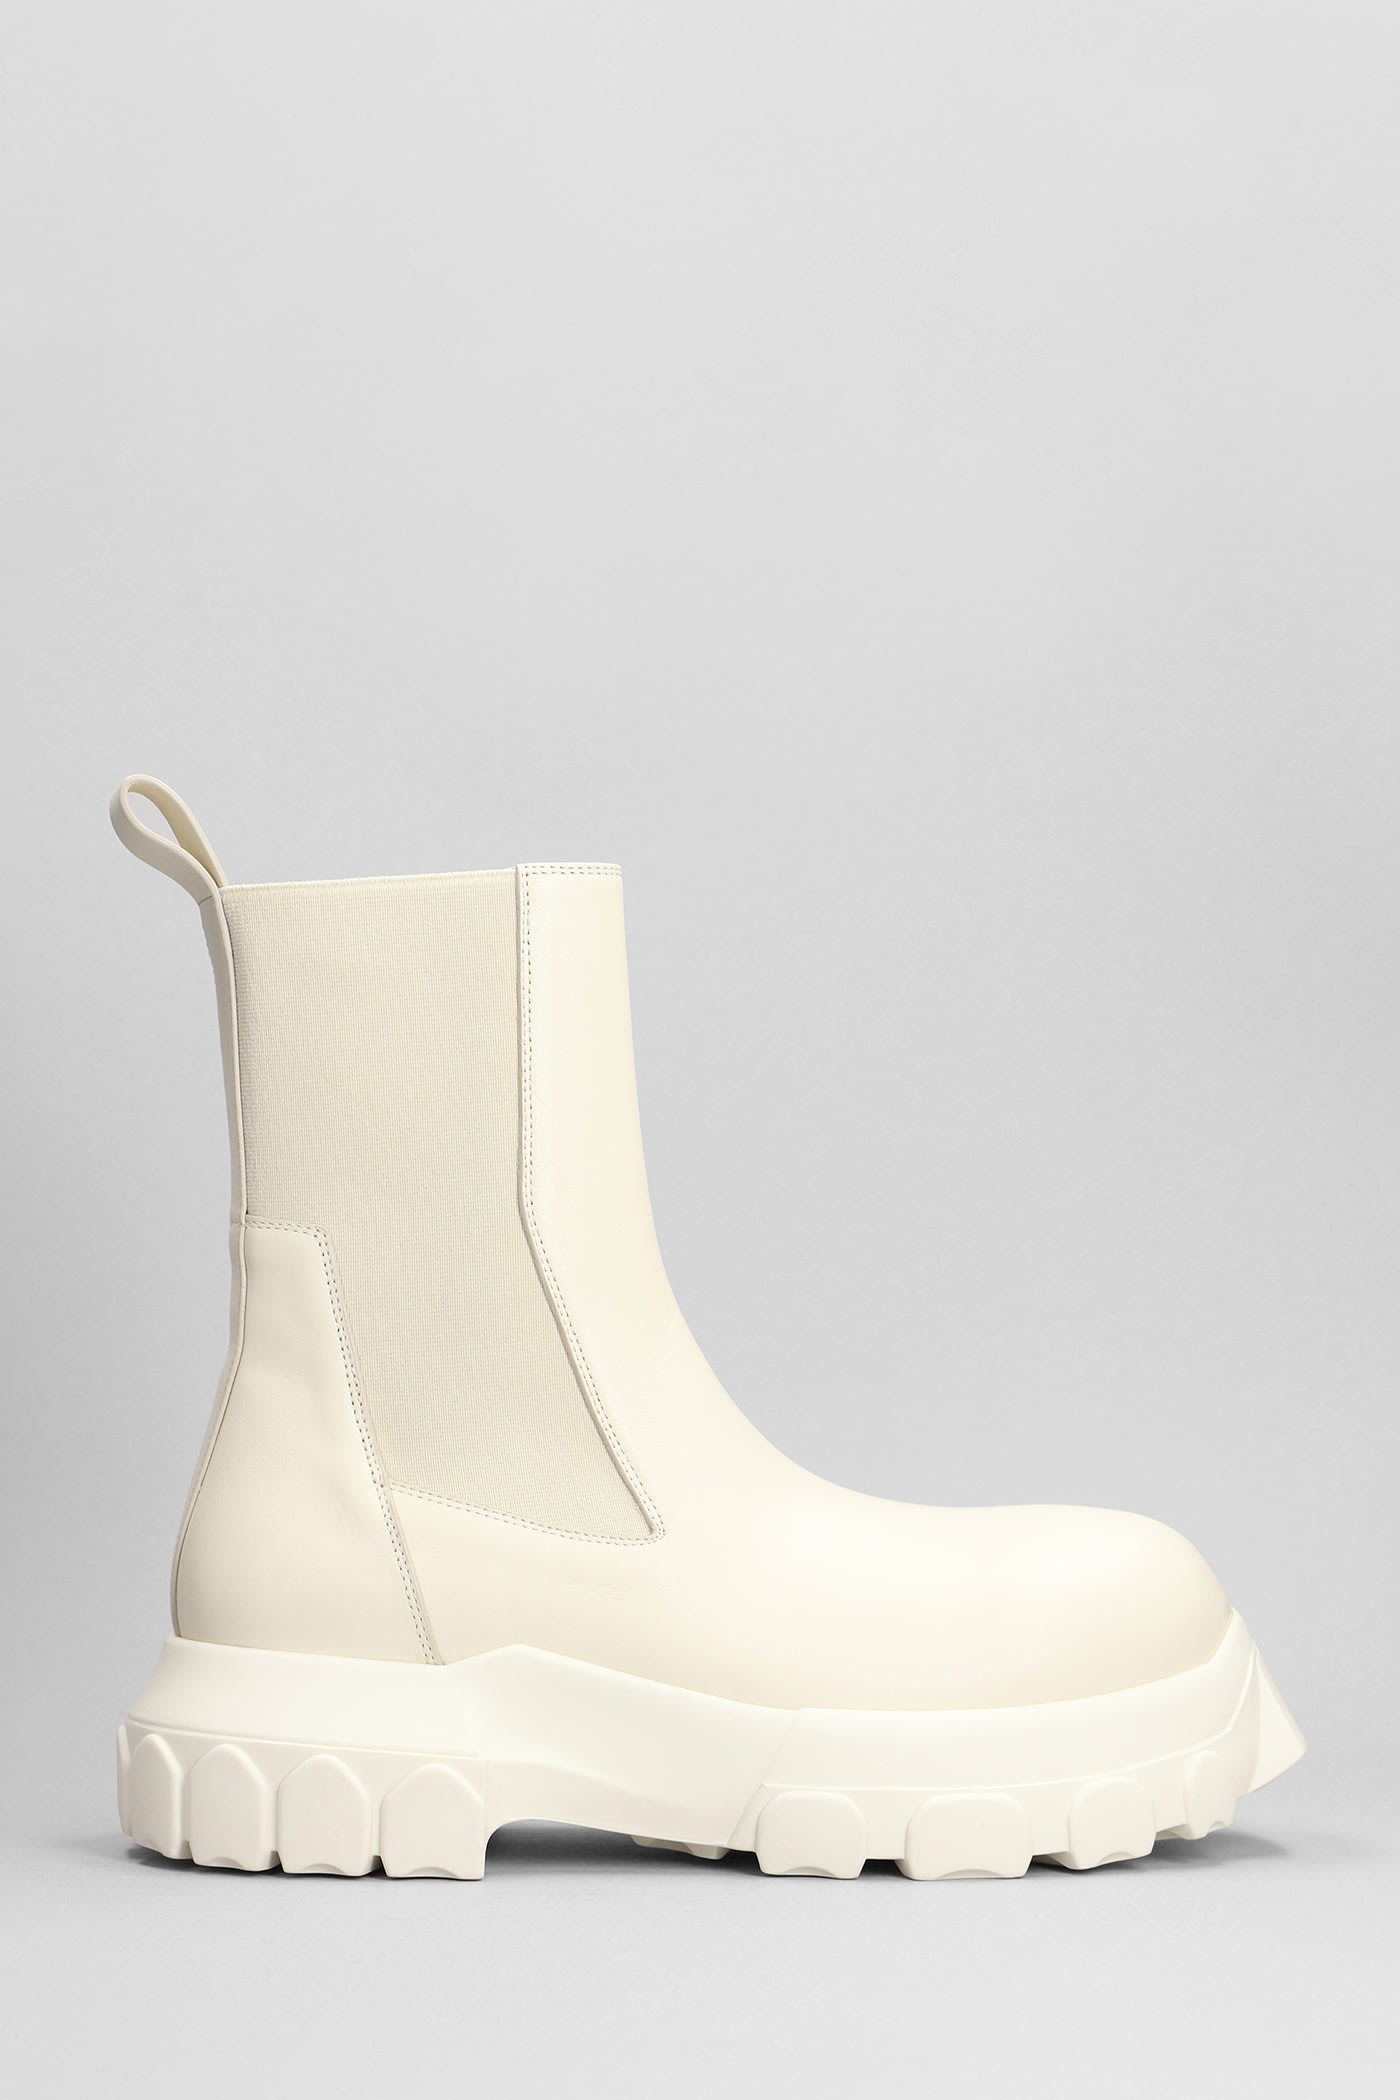 RICK OWENS BEATLE BOZO TRACTOR COMBAT BOOTS IN BEIGE LEATHER